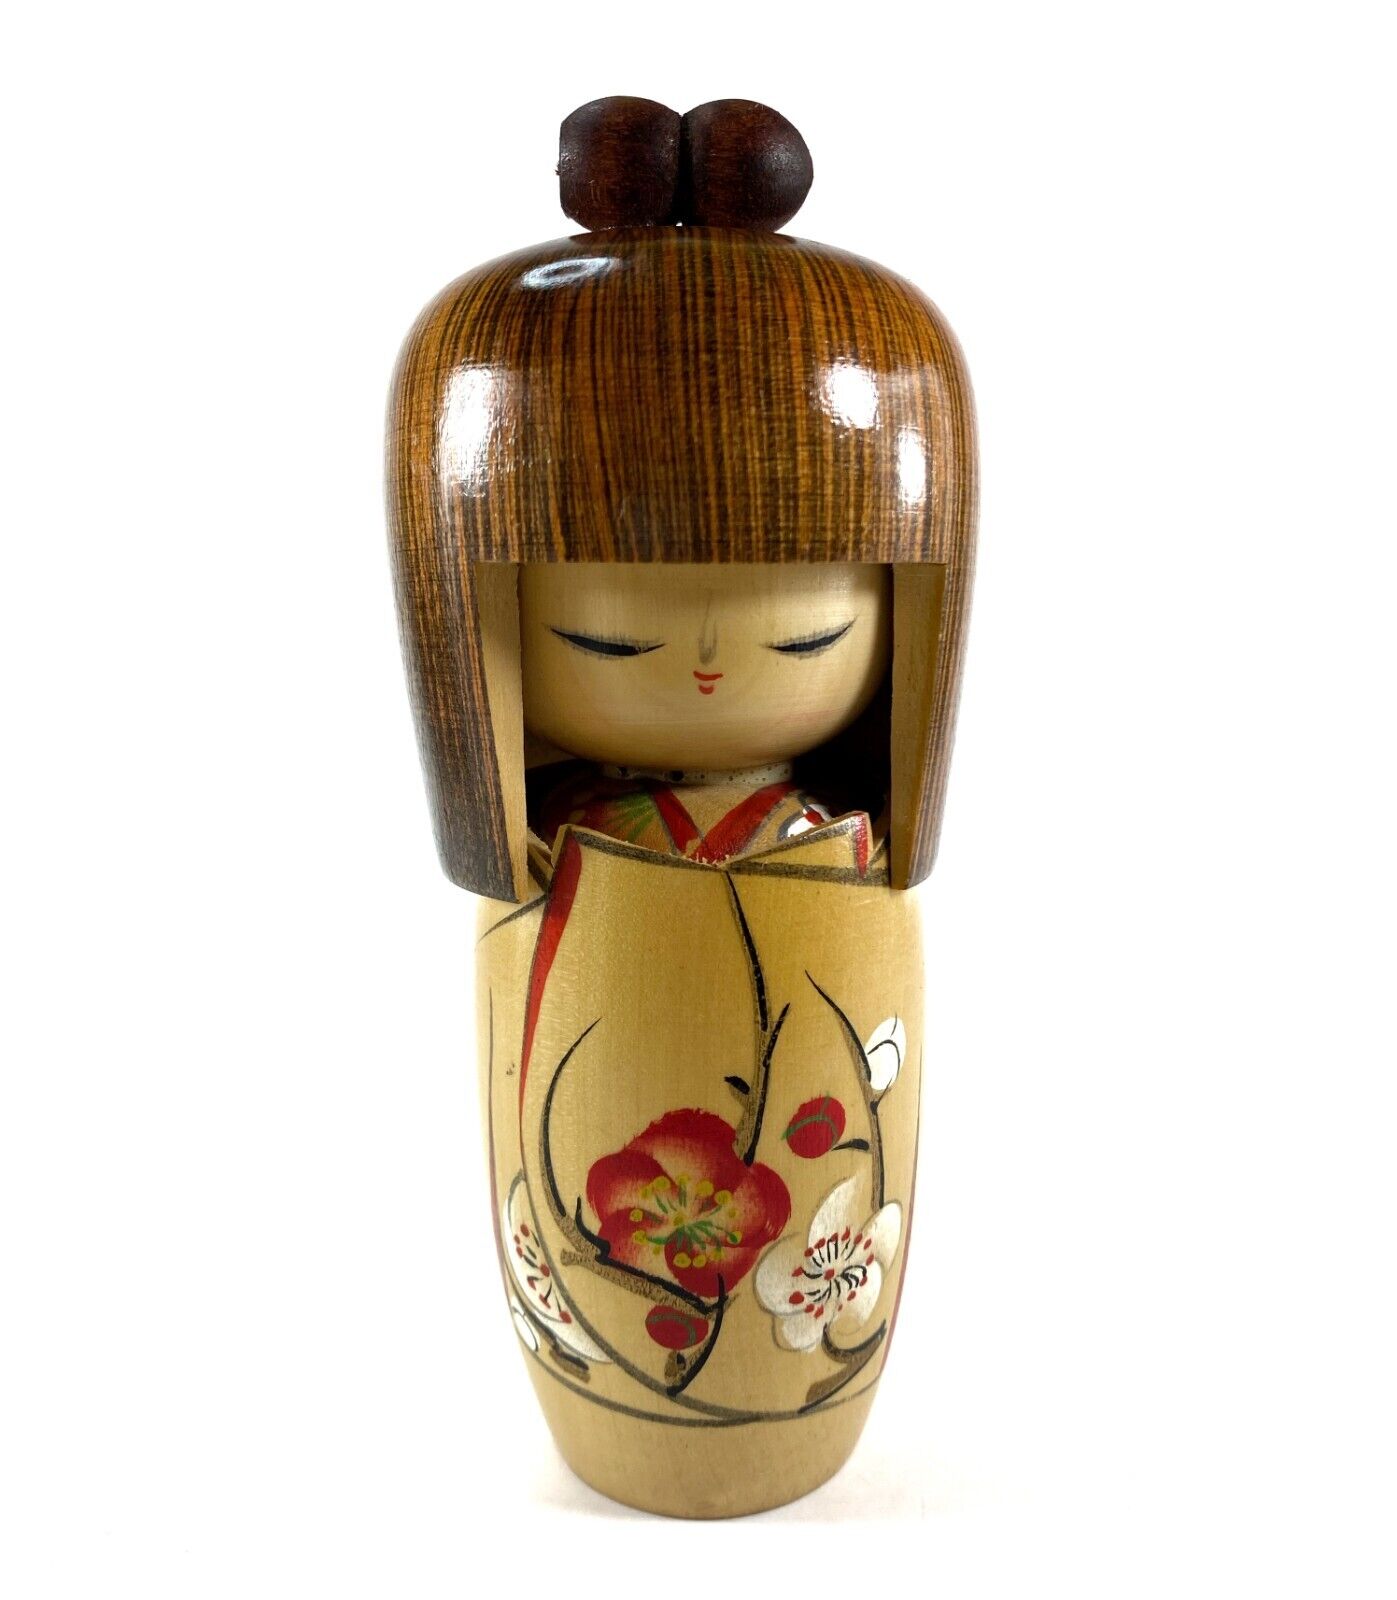 Kokeshi Wooden Doll Hand Painted Japan Floral Design Vintage Collectible